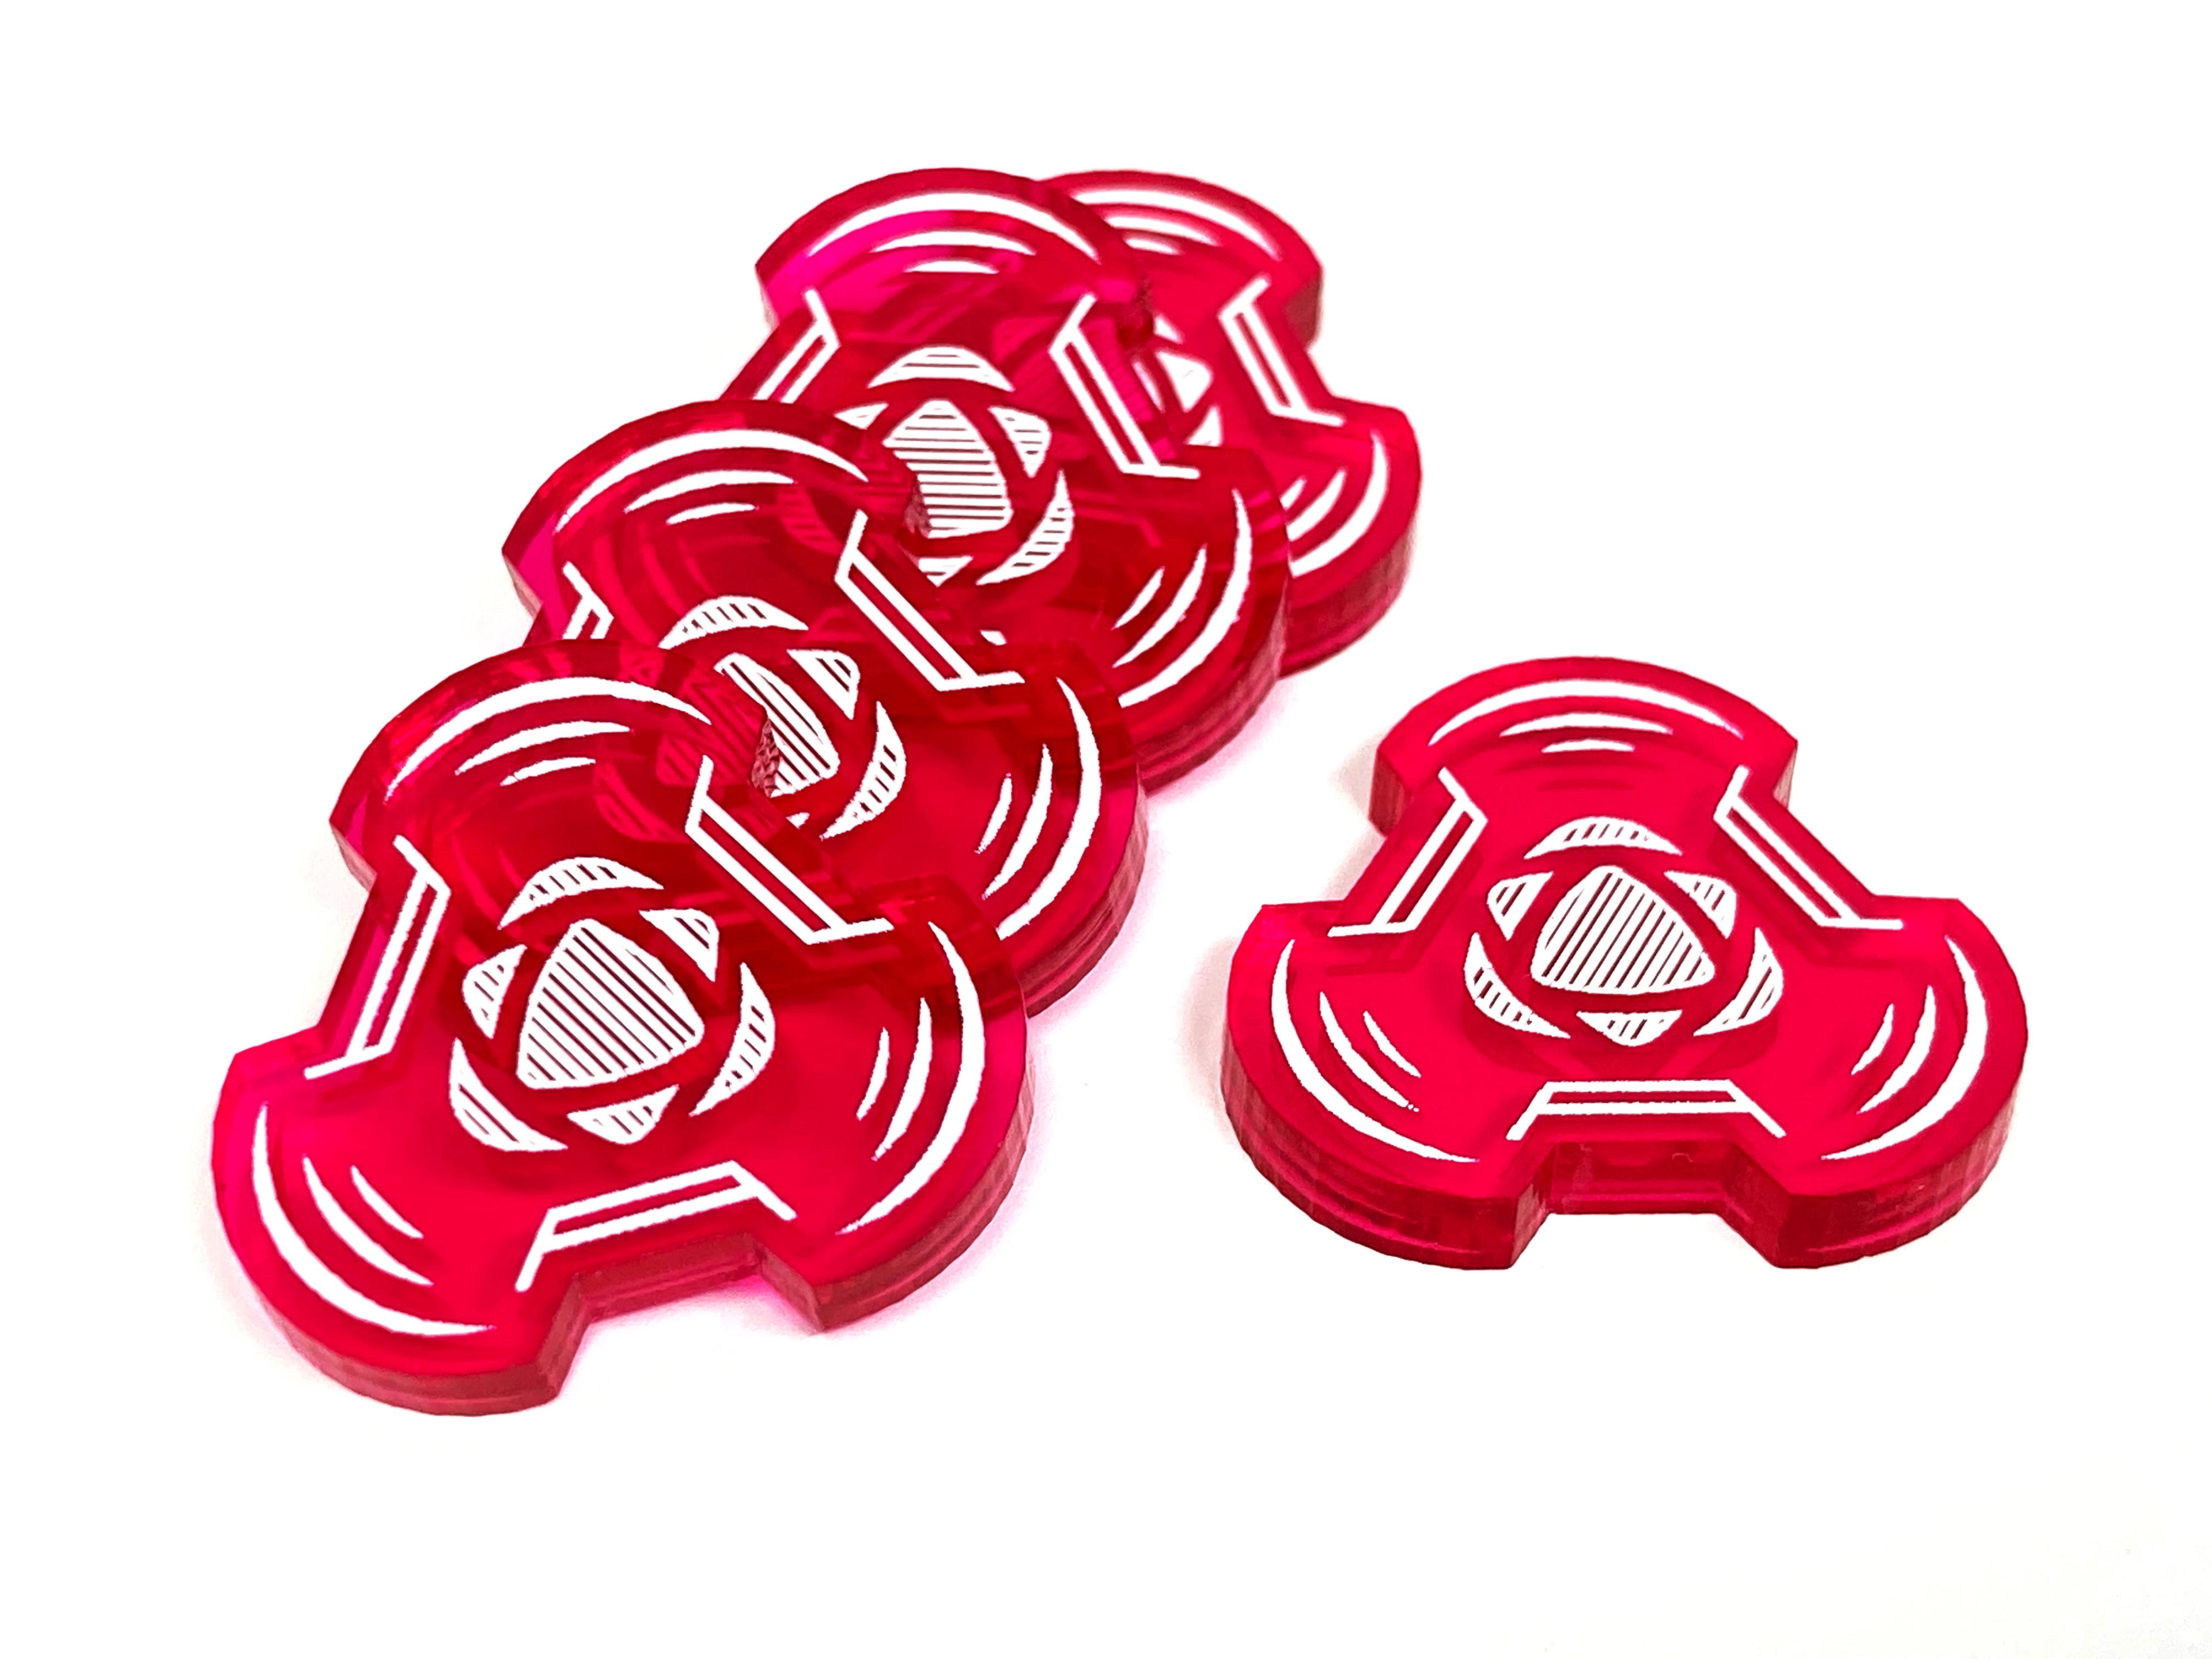 5 x Energy tokens - Translucent Series (Double Sided)